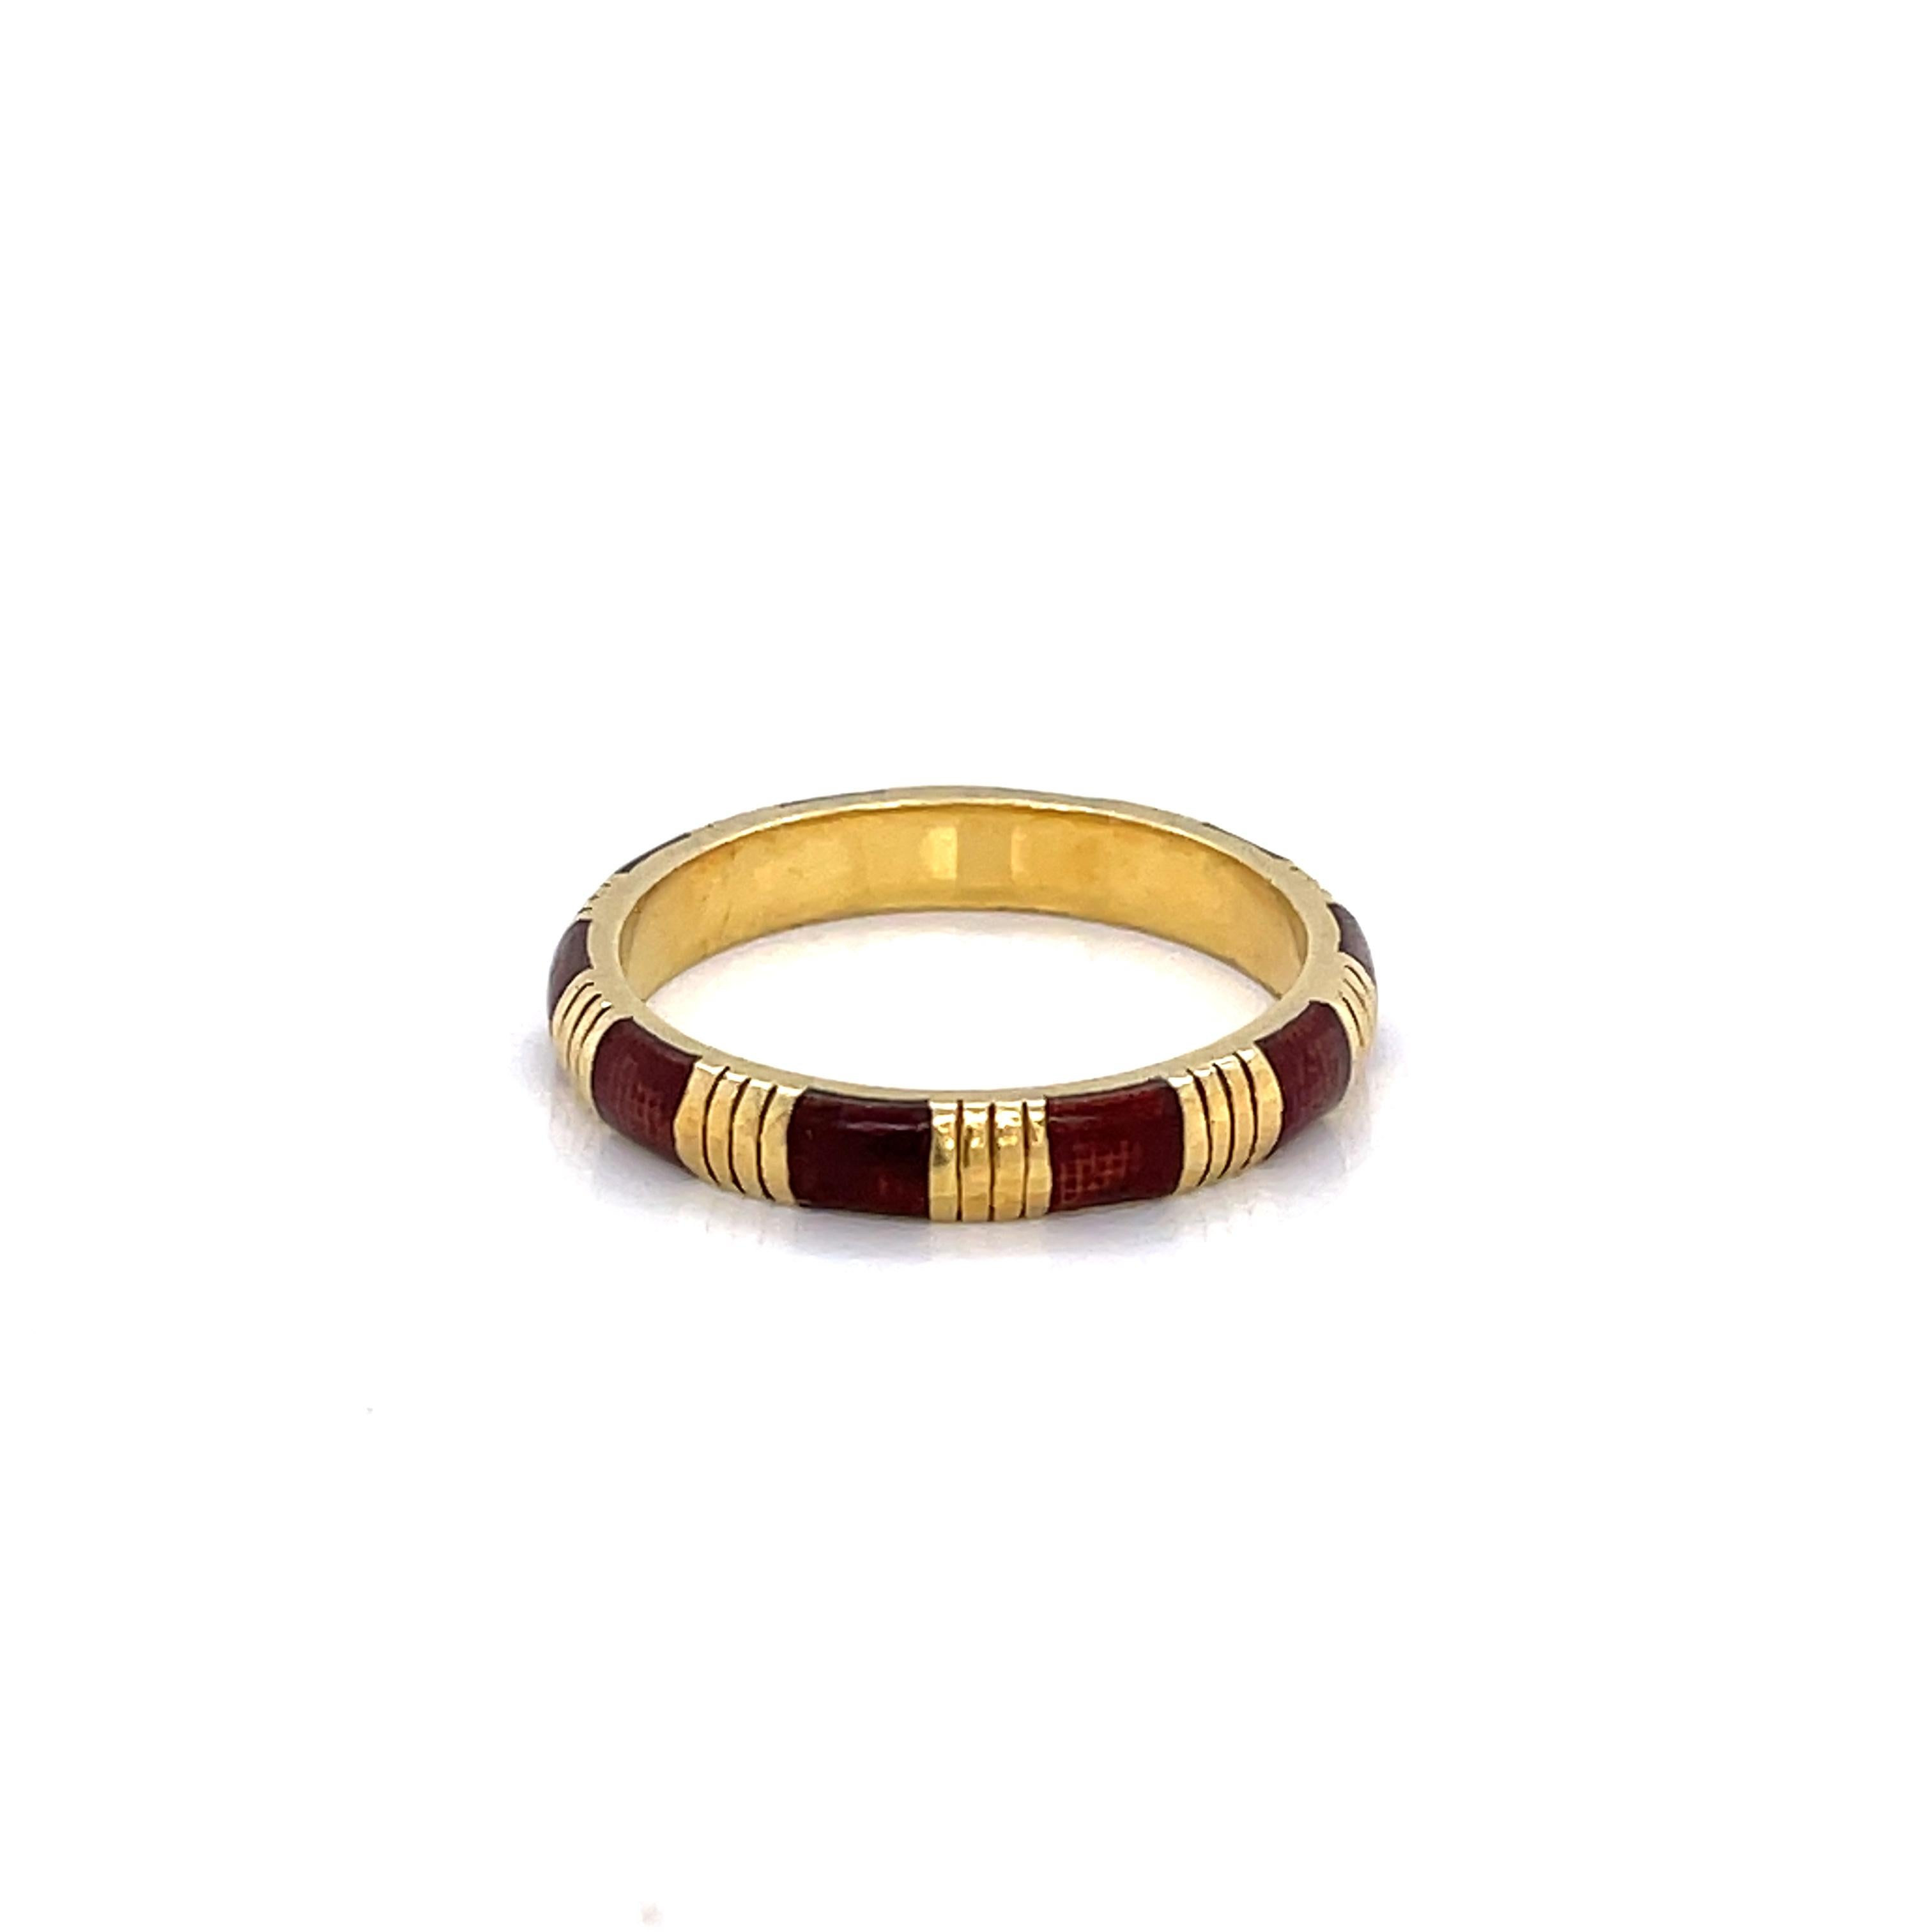 Hand painted accents of deep red enamel alternating with gold bars enhance this eighteen karat 18K yellow gold 3mm stacking band. In ring size 6 by Hidalgo. Gift Boxed.